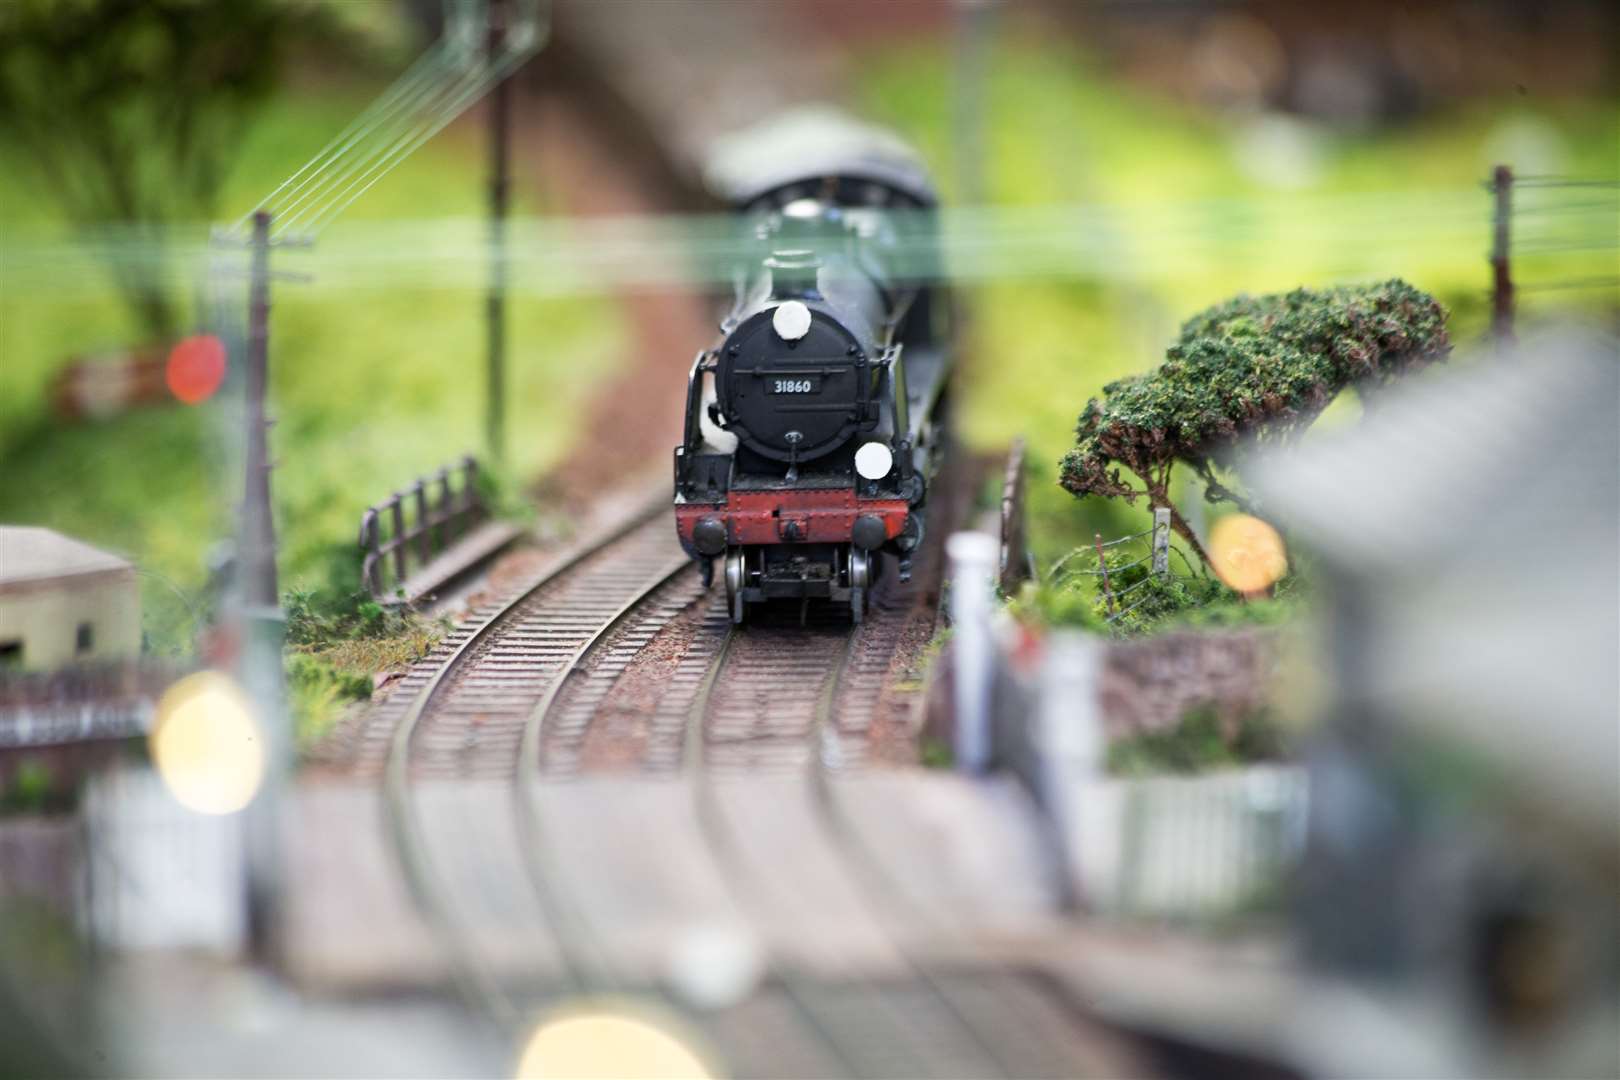 Hornby is based in Discovery Park in Sandwich